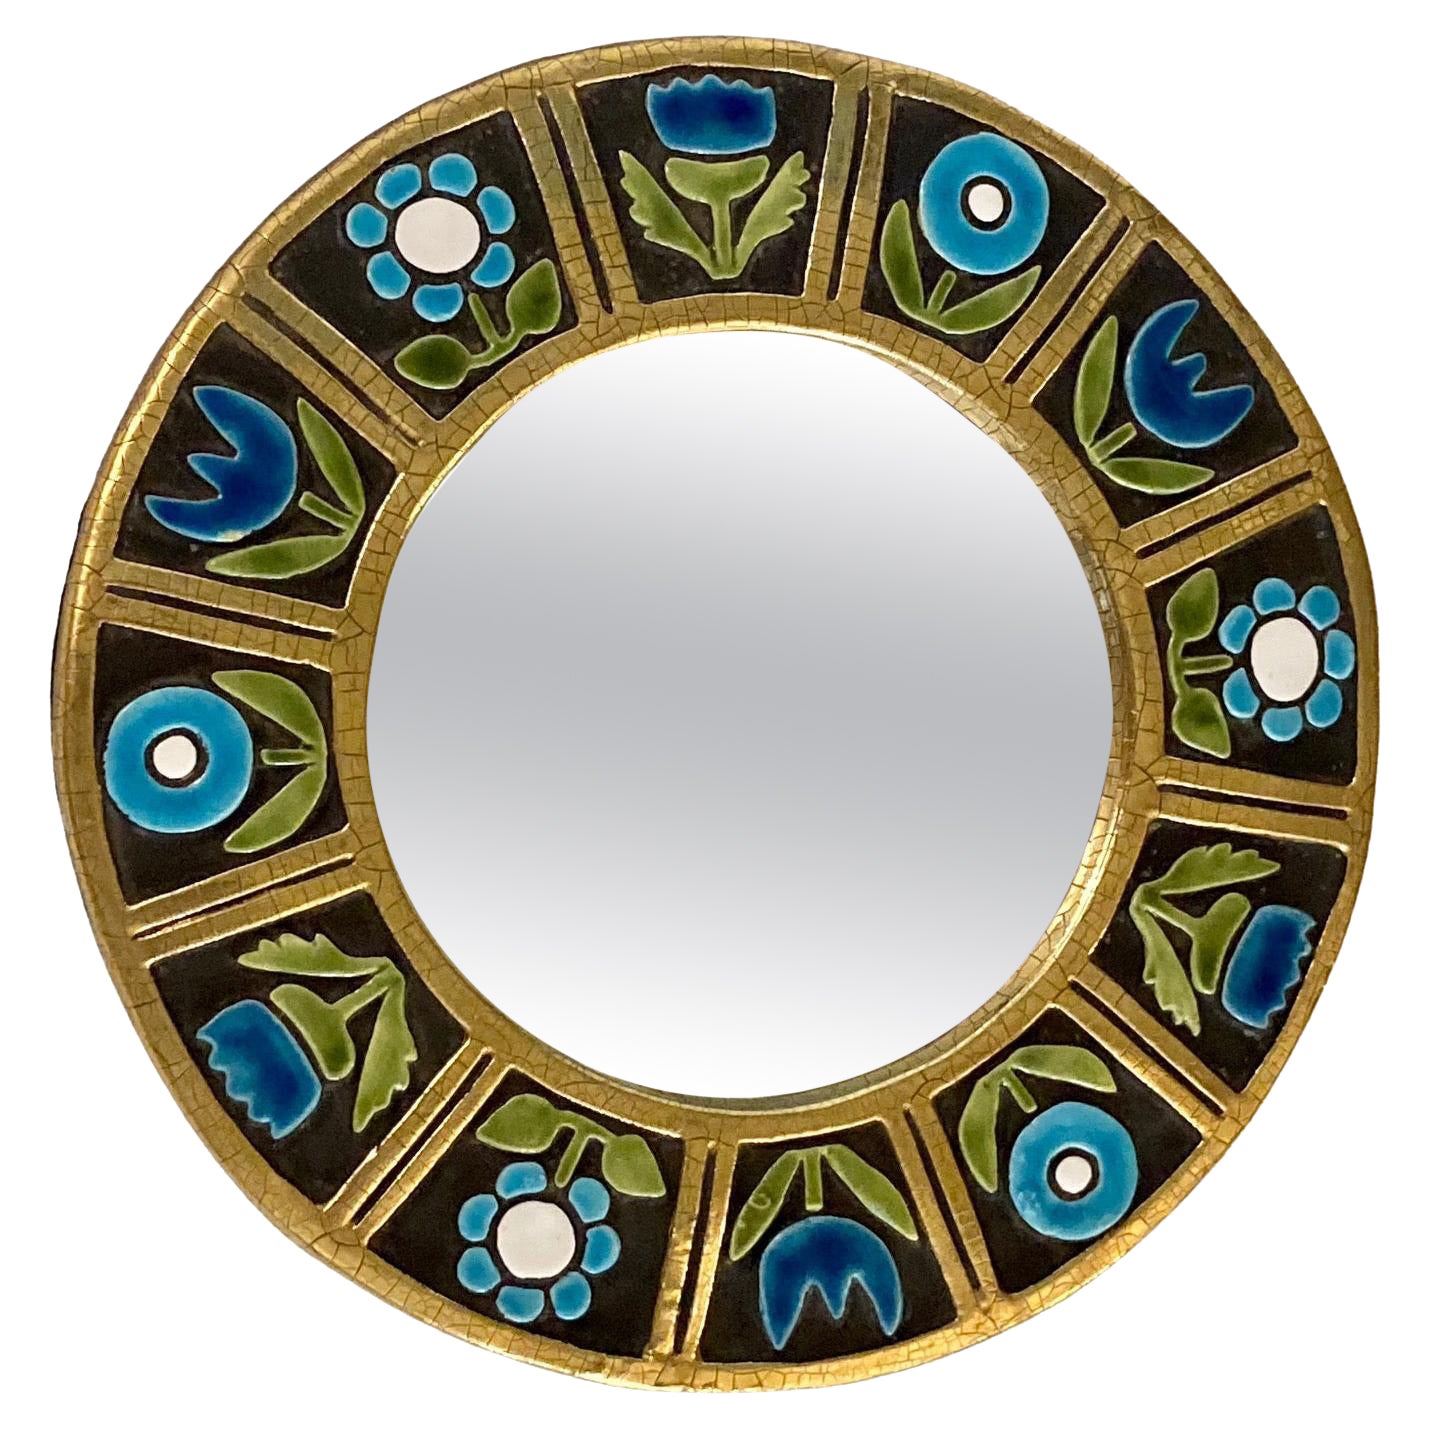 Round Ceramic Mirror Decorated with Blue Flowers by Mithé Espelt, France